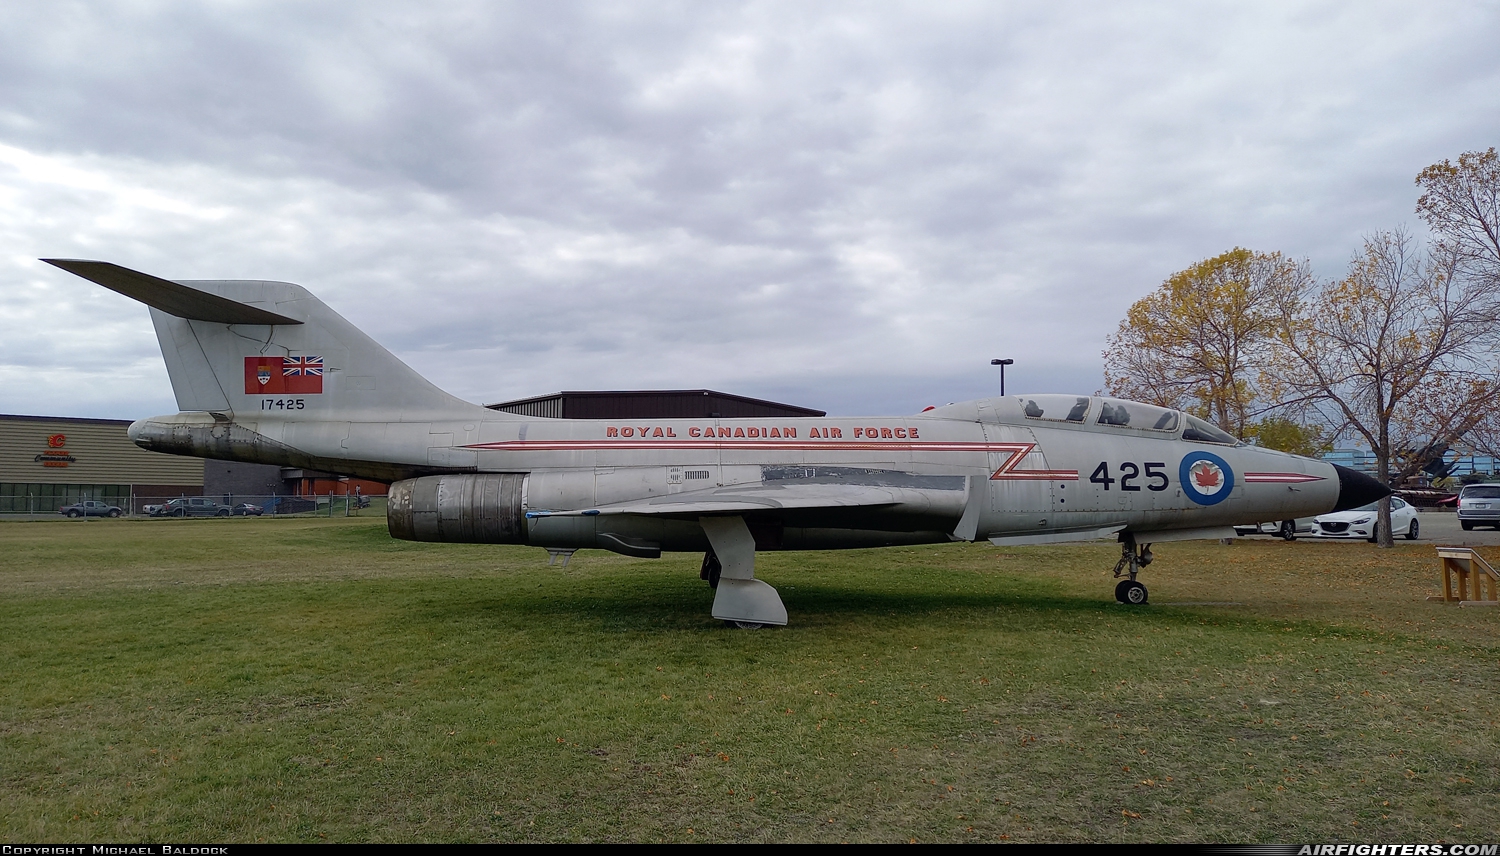 Canada - Air Force McDonnell CF-101B Voodoo 17425 at Off-Airport - Calgary, Canada